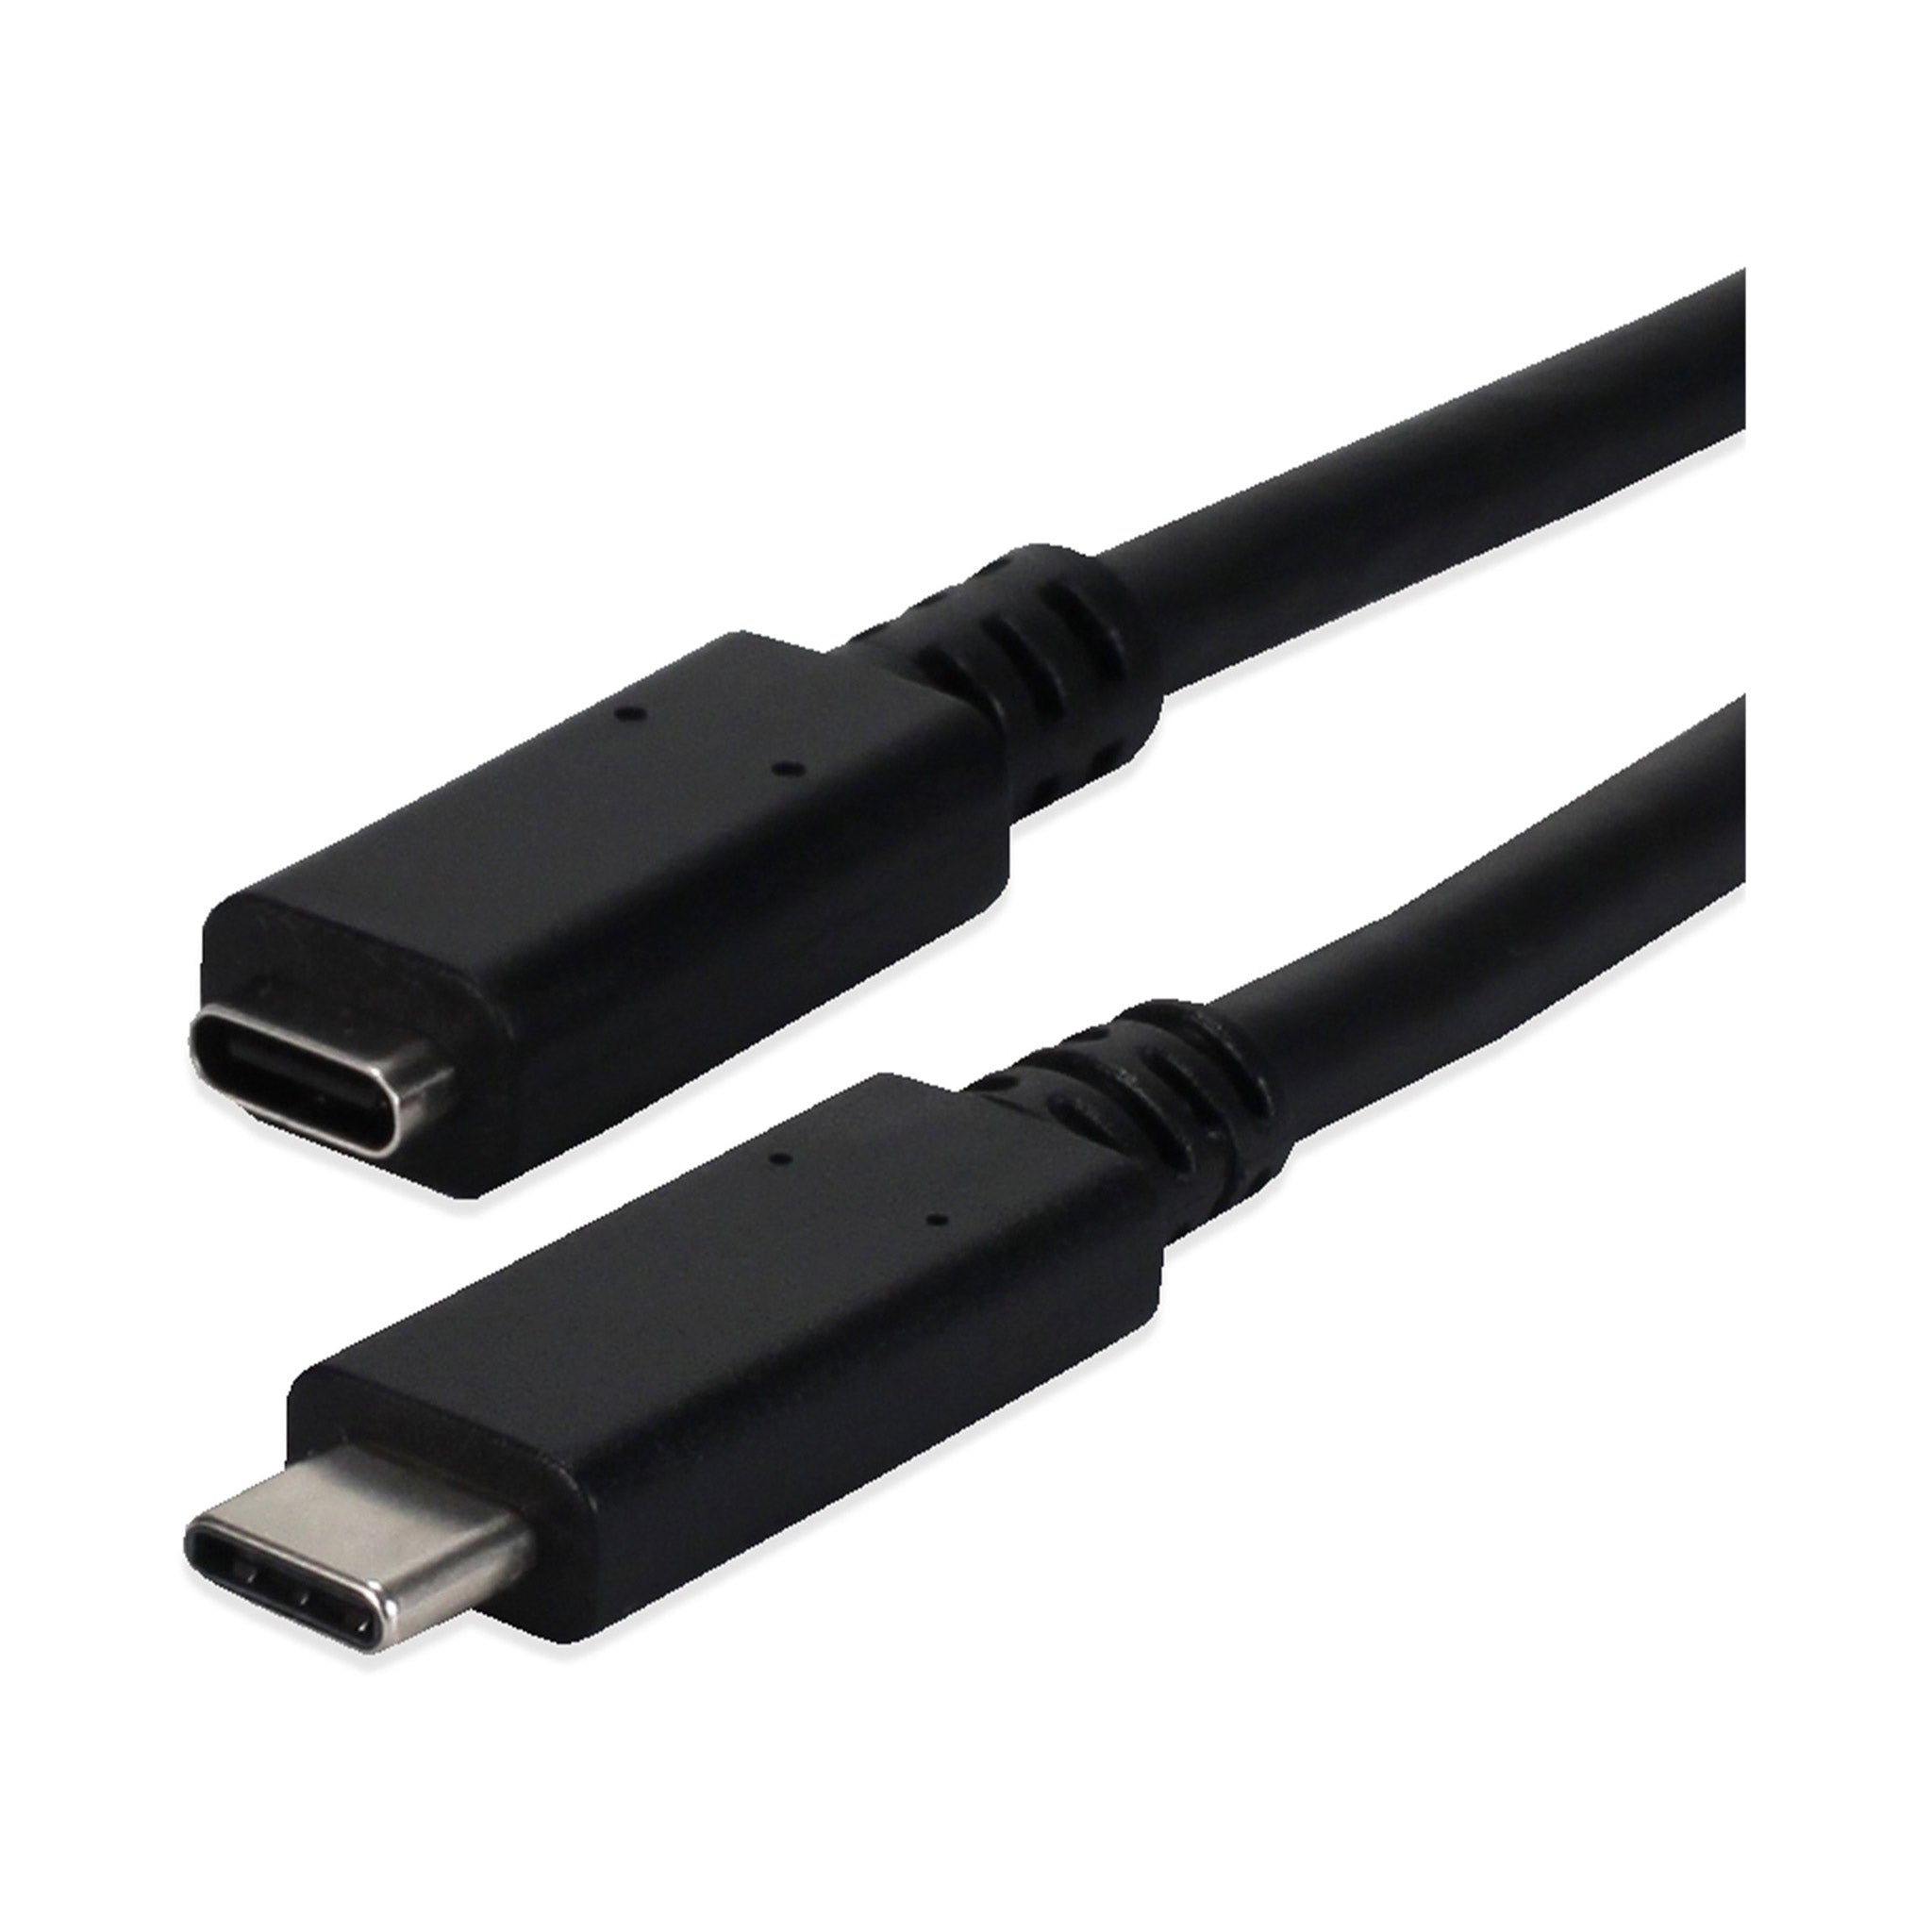 QVS USB 2.0 (Type A) Male to USB 2.0 (Type-A) Male Cable 6 ft